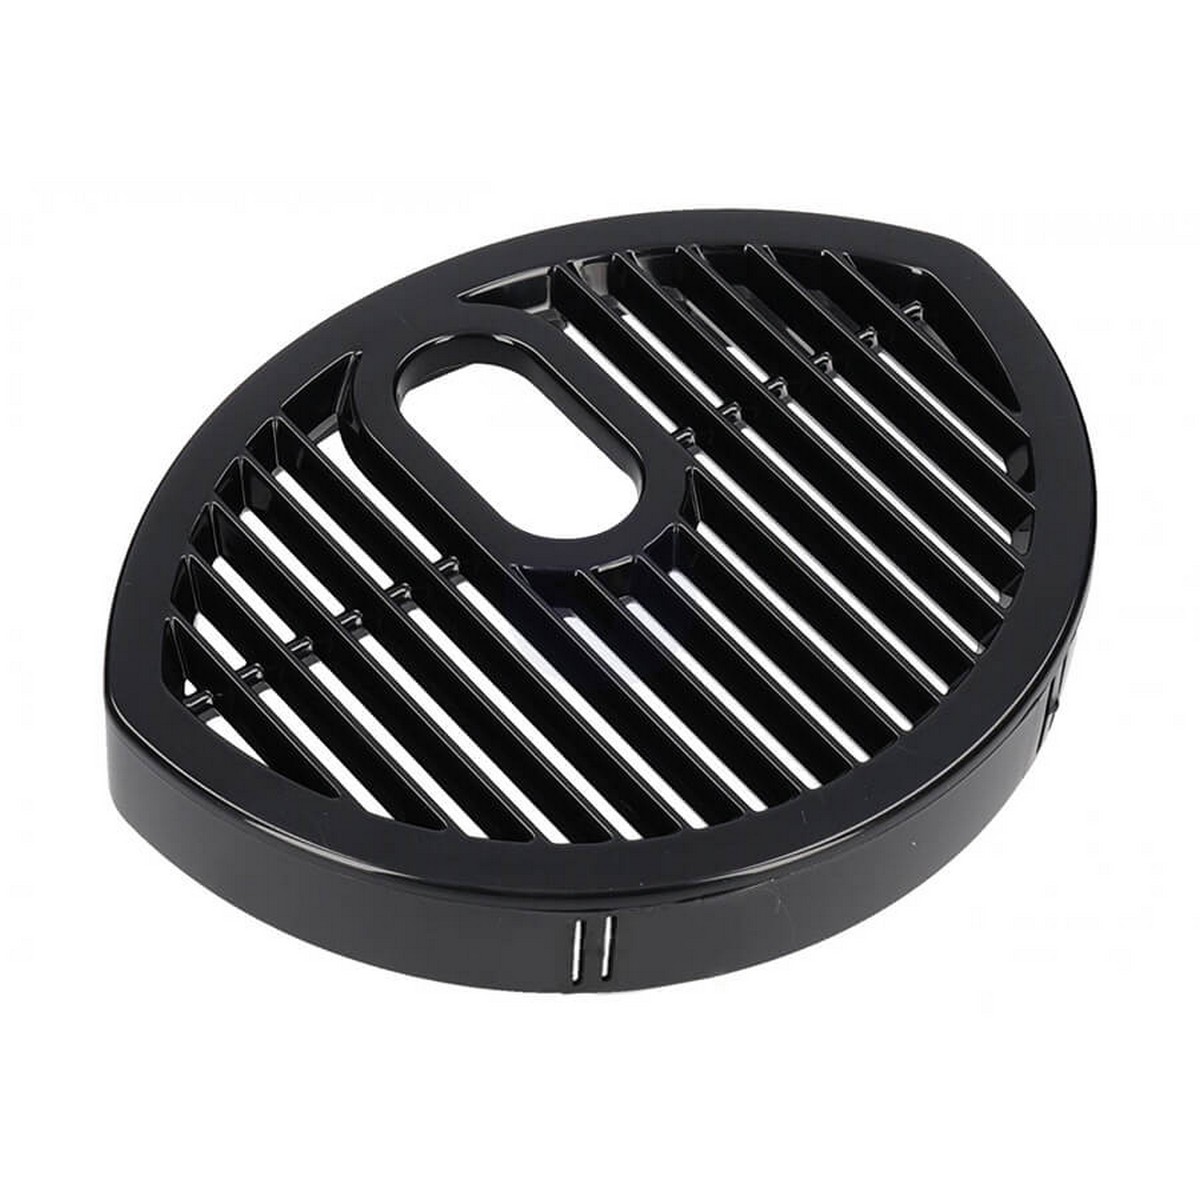 Krups Dolce Gusto Drip Grid MS-622725 for Piccolo Genio 